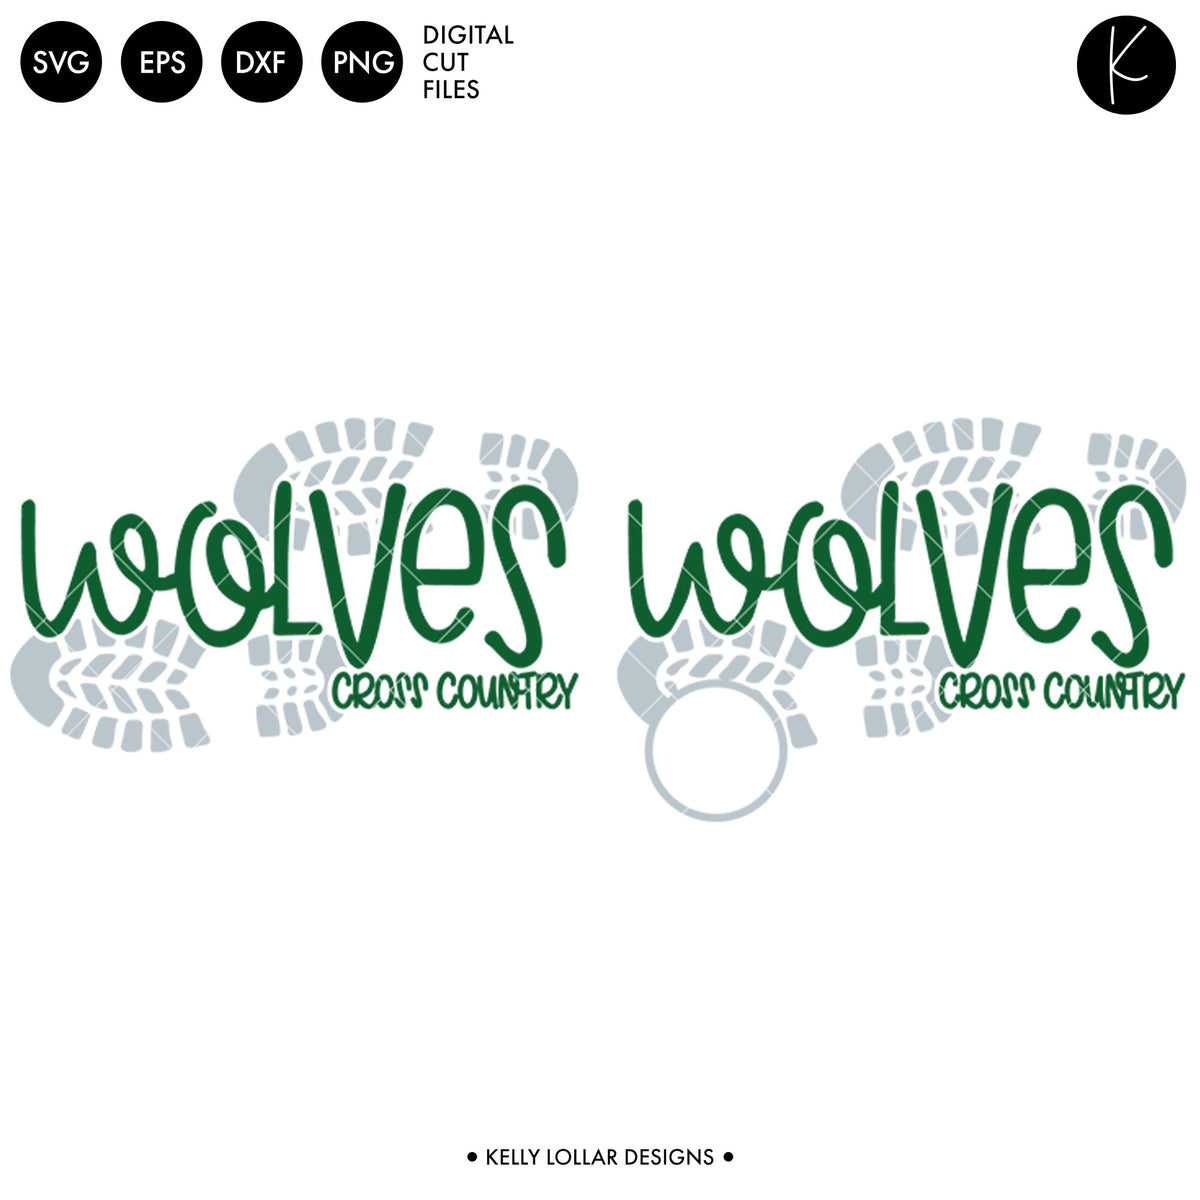 Wolves Cross Country Bundle | SVG DXF EPS PNG Cut Files